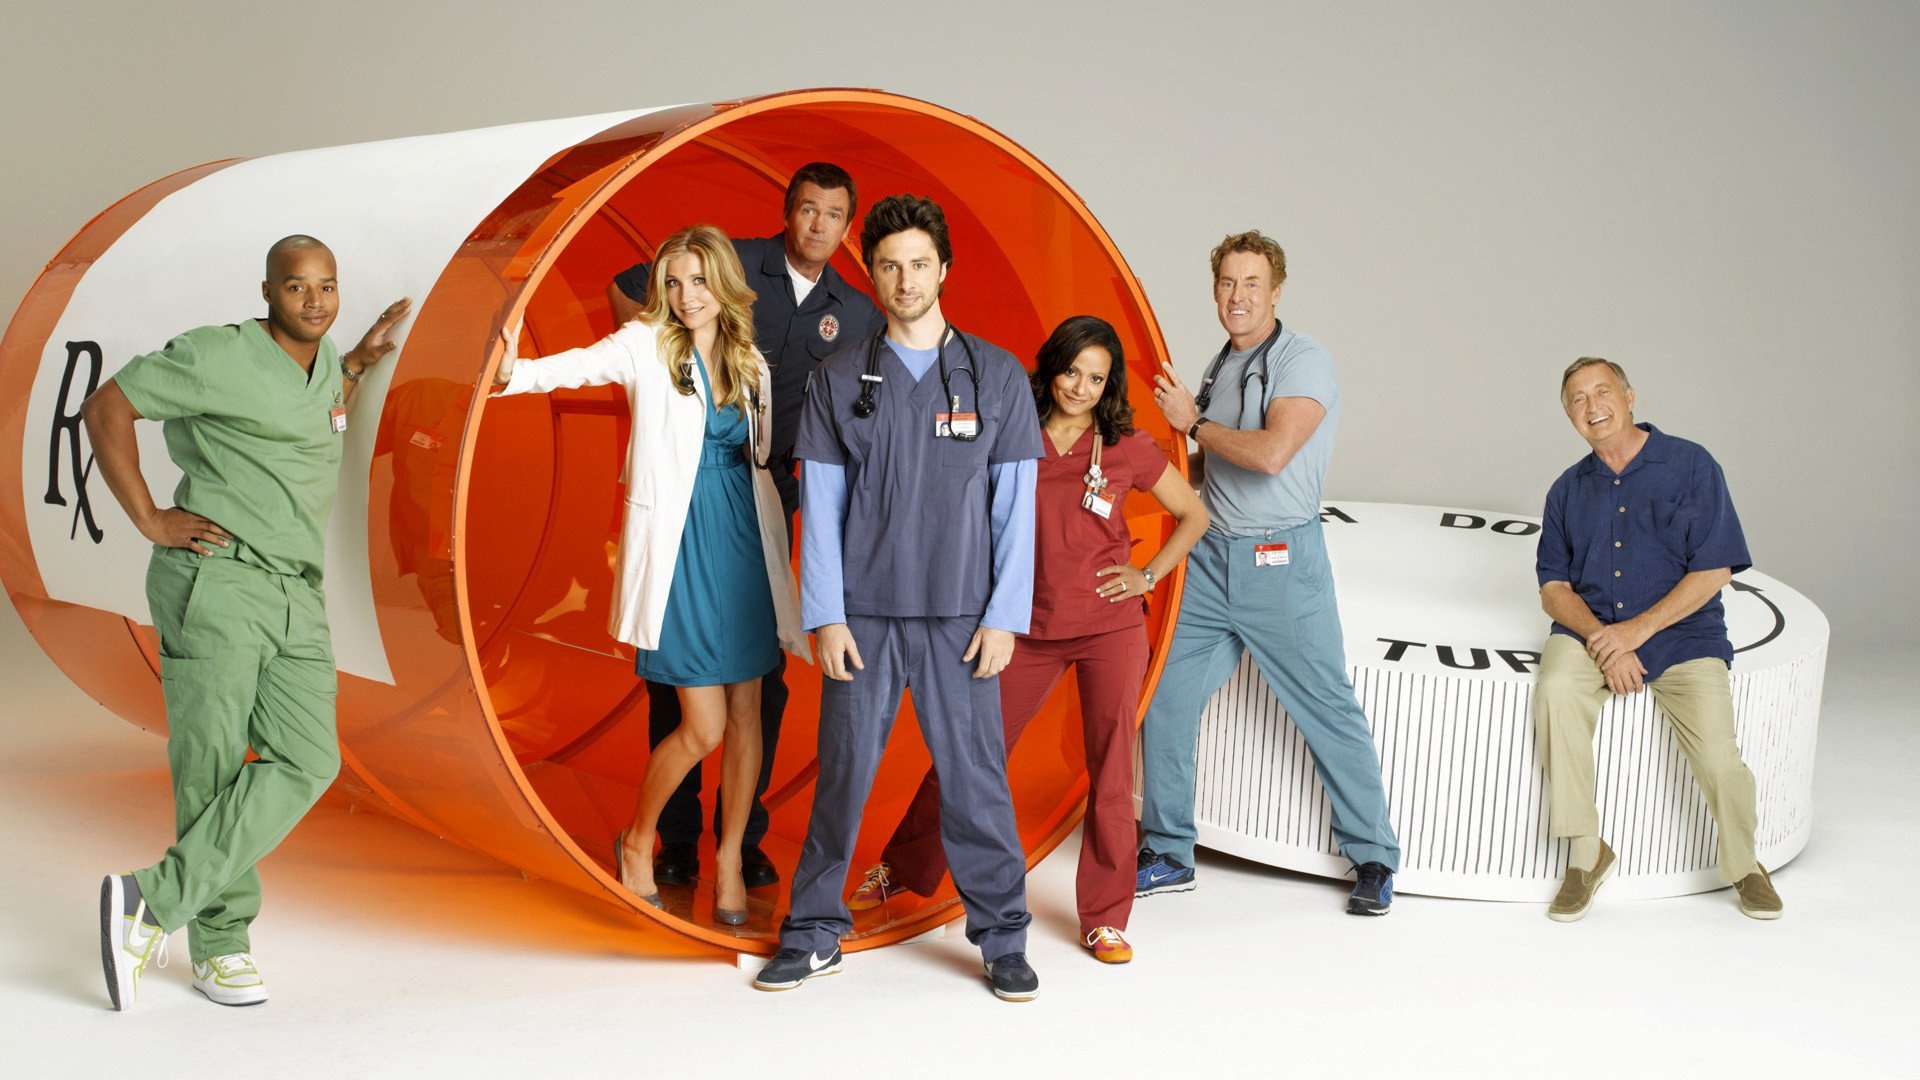 Scrubs (TV Series): An ABC Studios medical drama television show about the work and lives of young doctors. 1920x1080 Full HD Background.